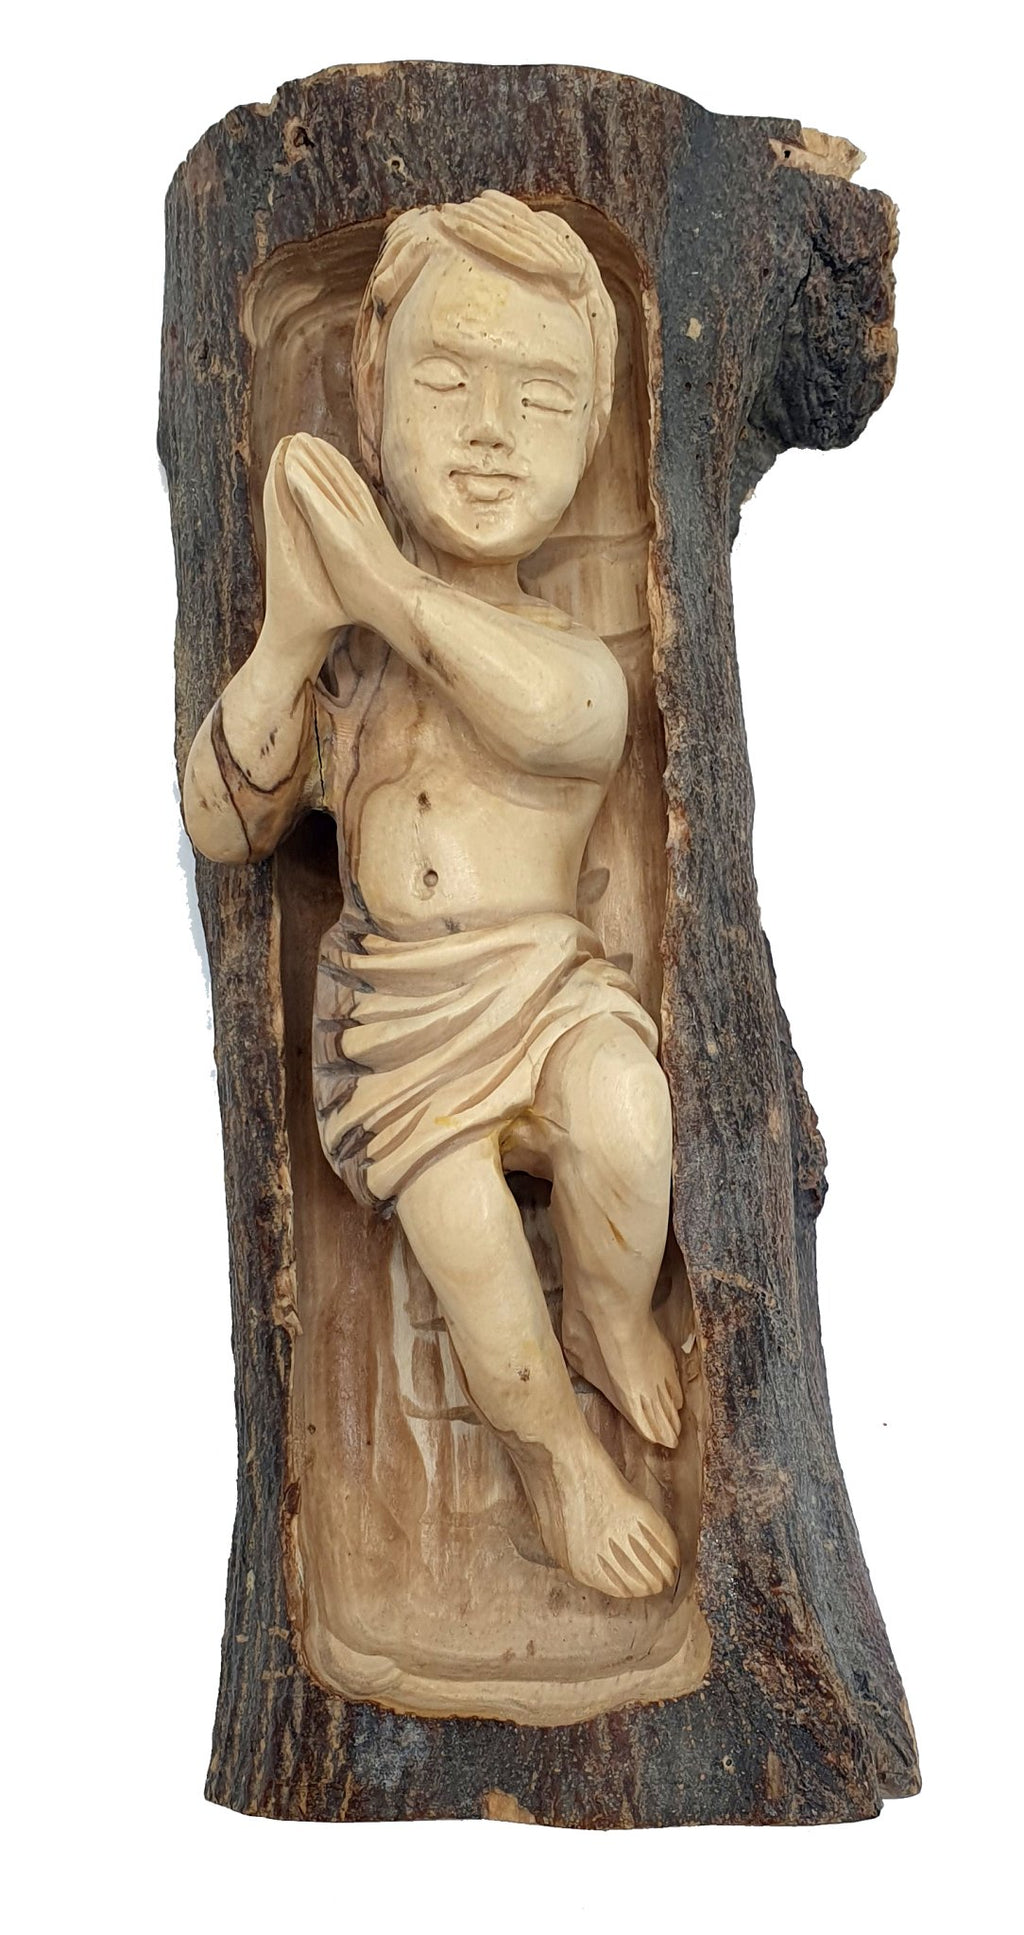 Zuluf Large Olive Wood Baby Jesus Statue - 9.5 Inches | Hand-Carved Nativity Figurine for Spiritual Decor and Christmas Displays - Zuluf